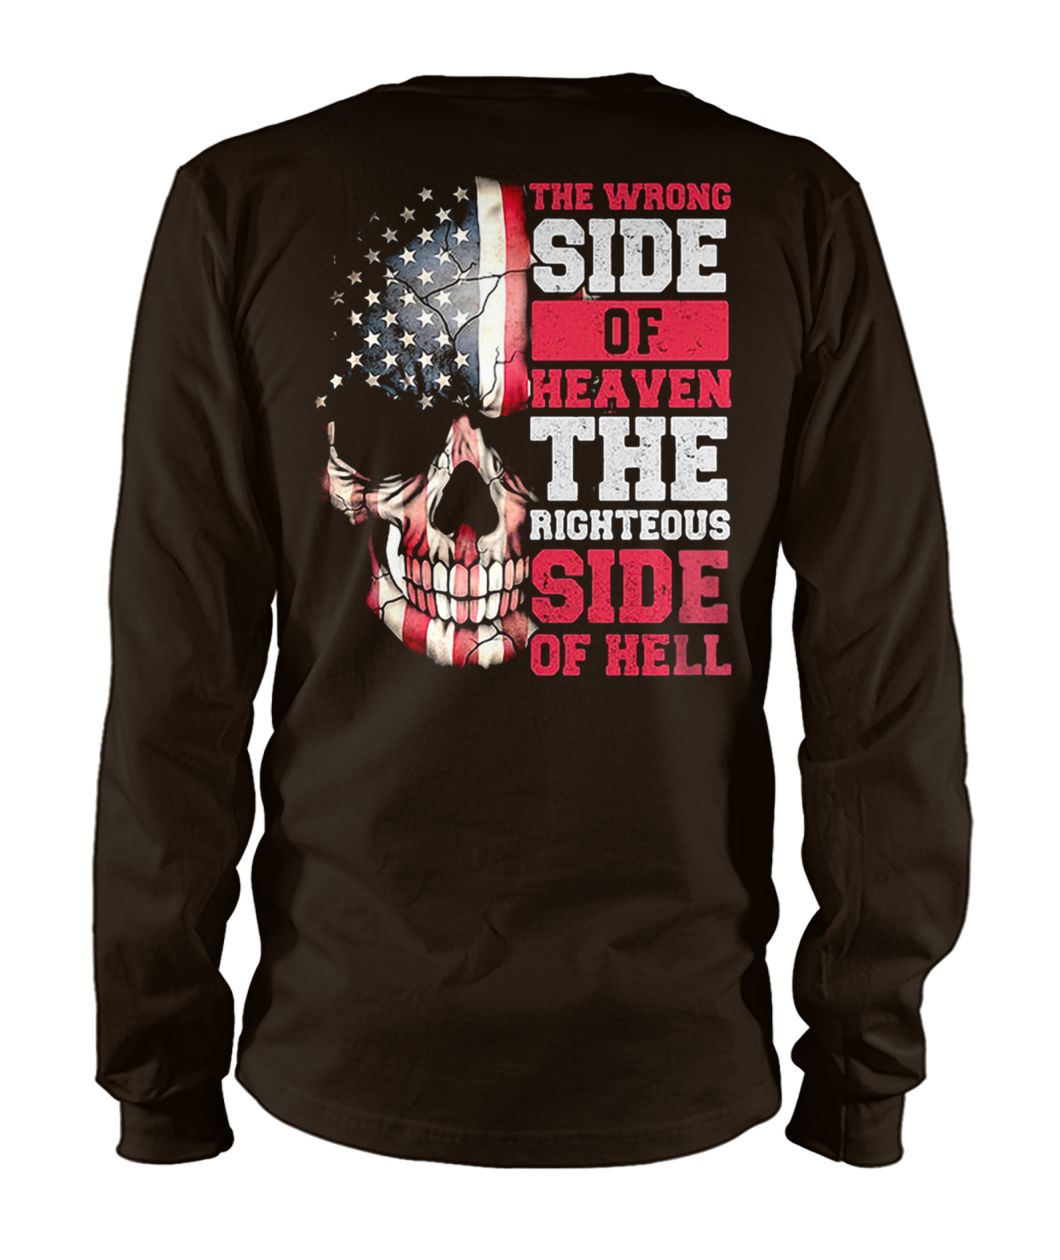 American flag skull the wrong side of heaven the righteous side of hell unisex long sleeve